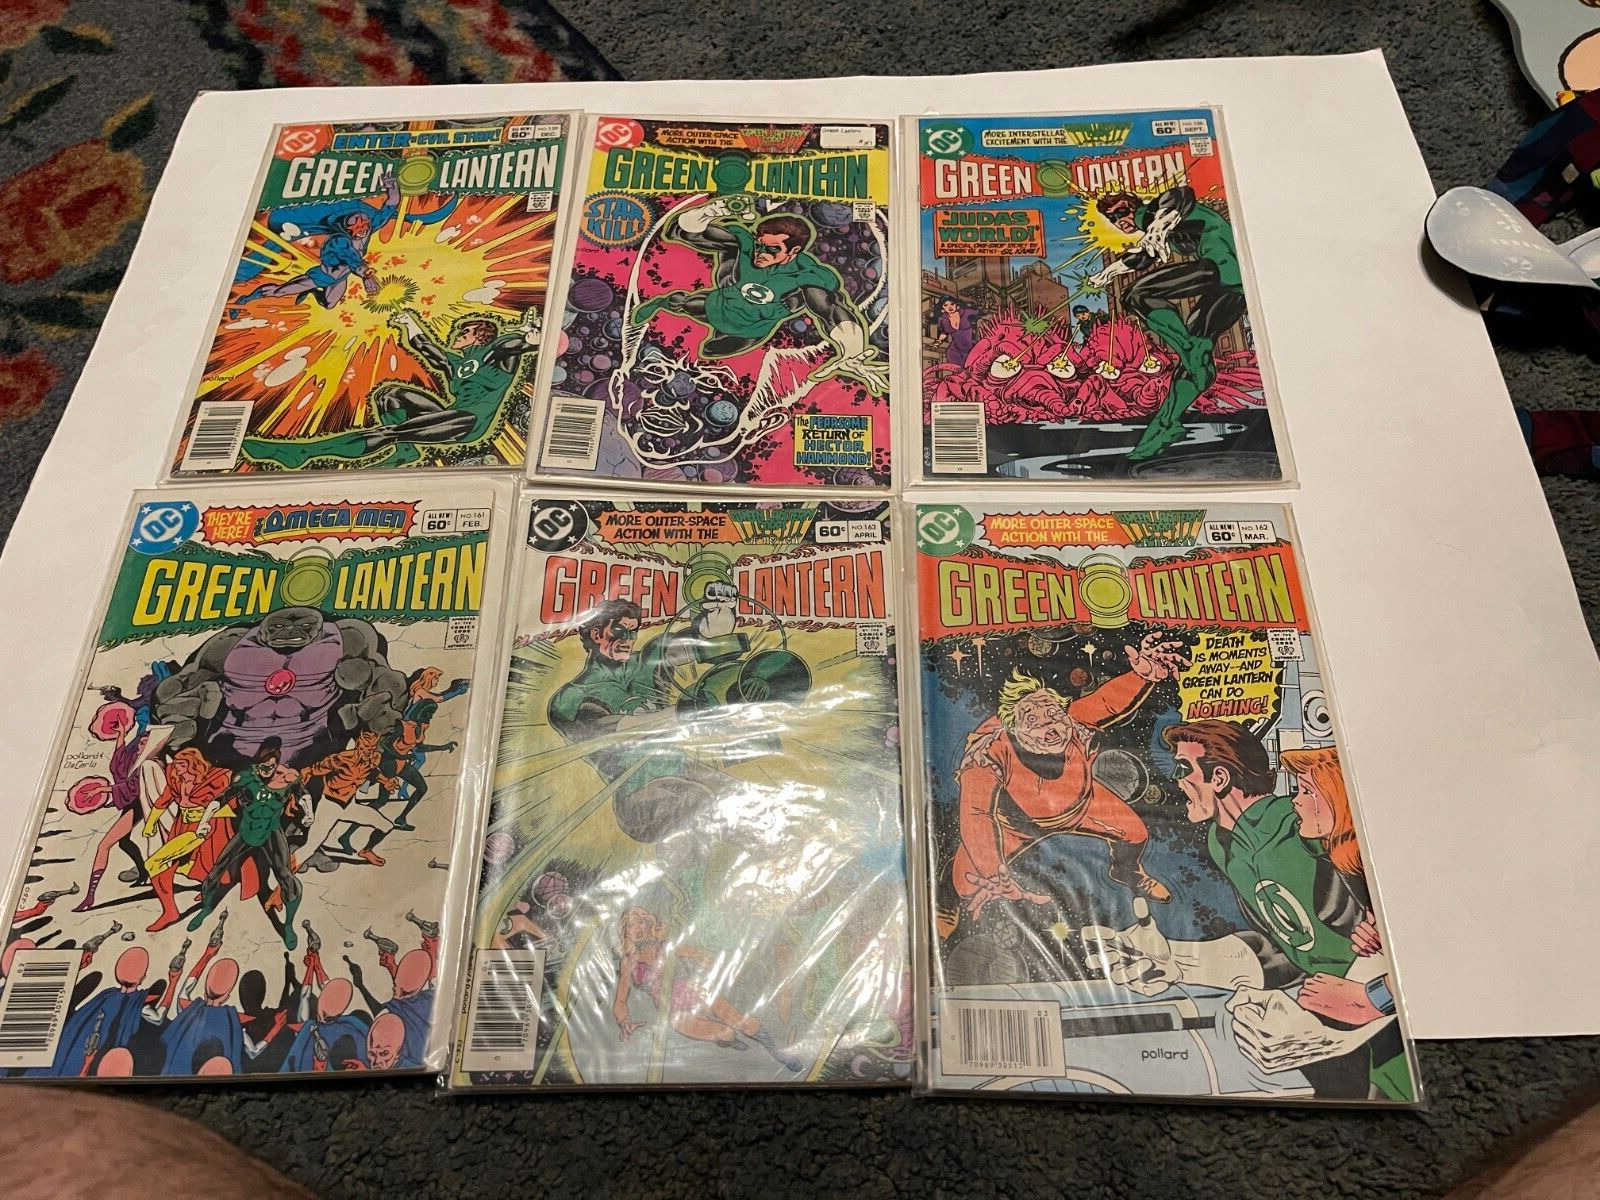 Green Lantern Lot of 11 Issues #167-155-179-166-158-156-157-159-161-162-162 dc